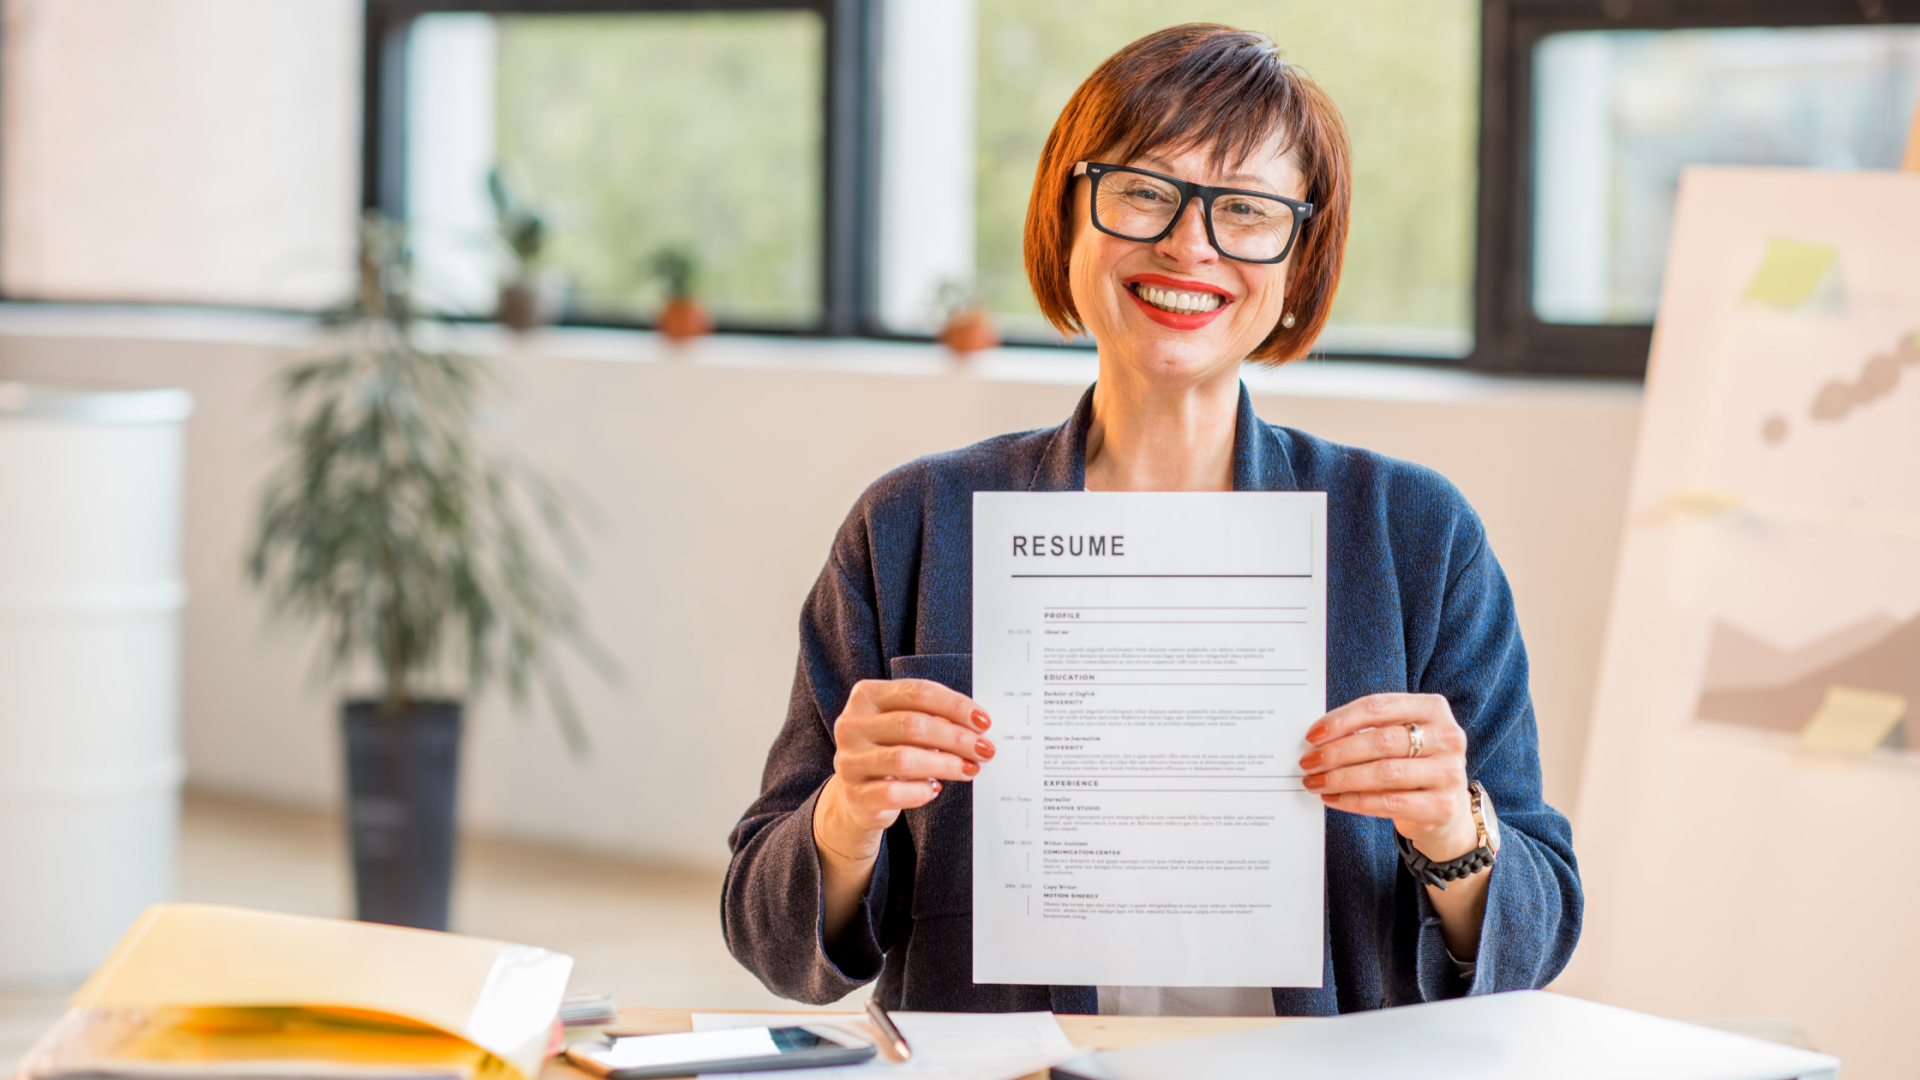 Key Points to Include in a Healthcare Resume